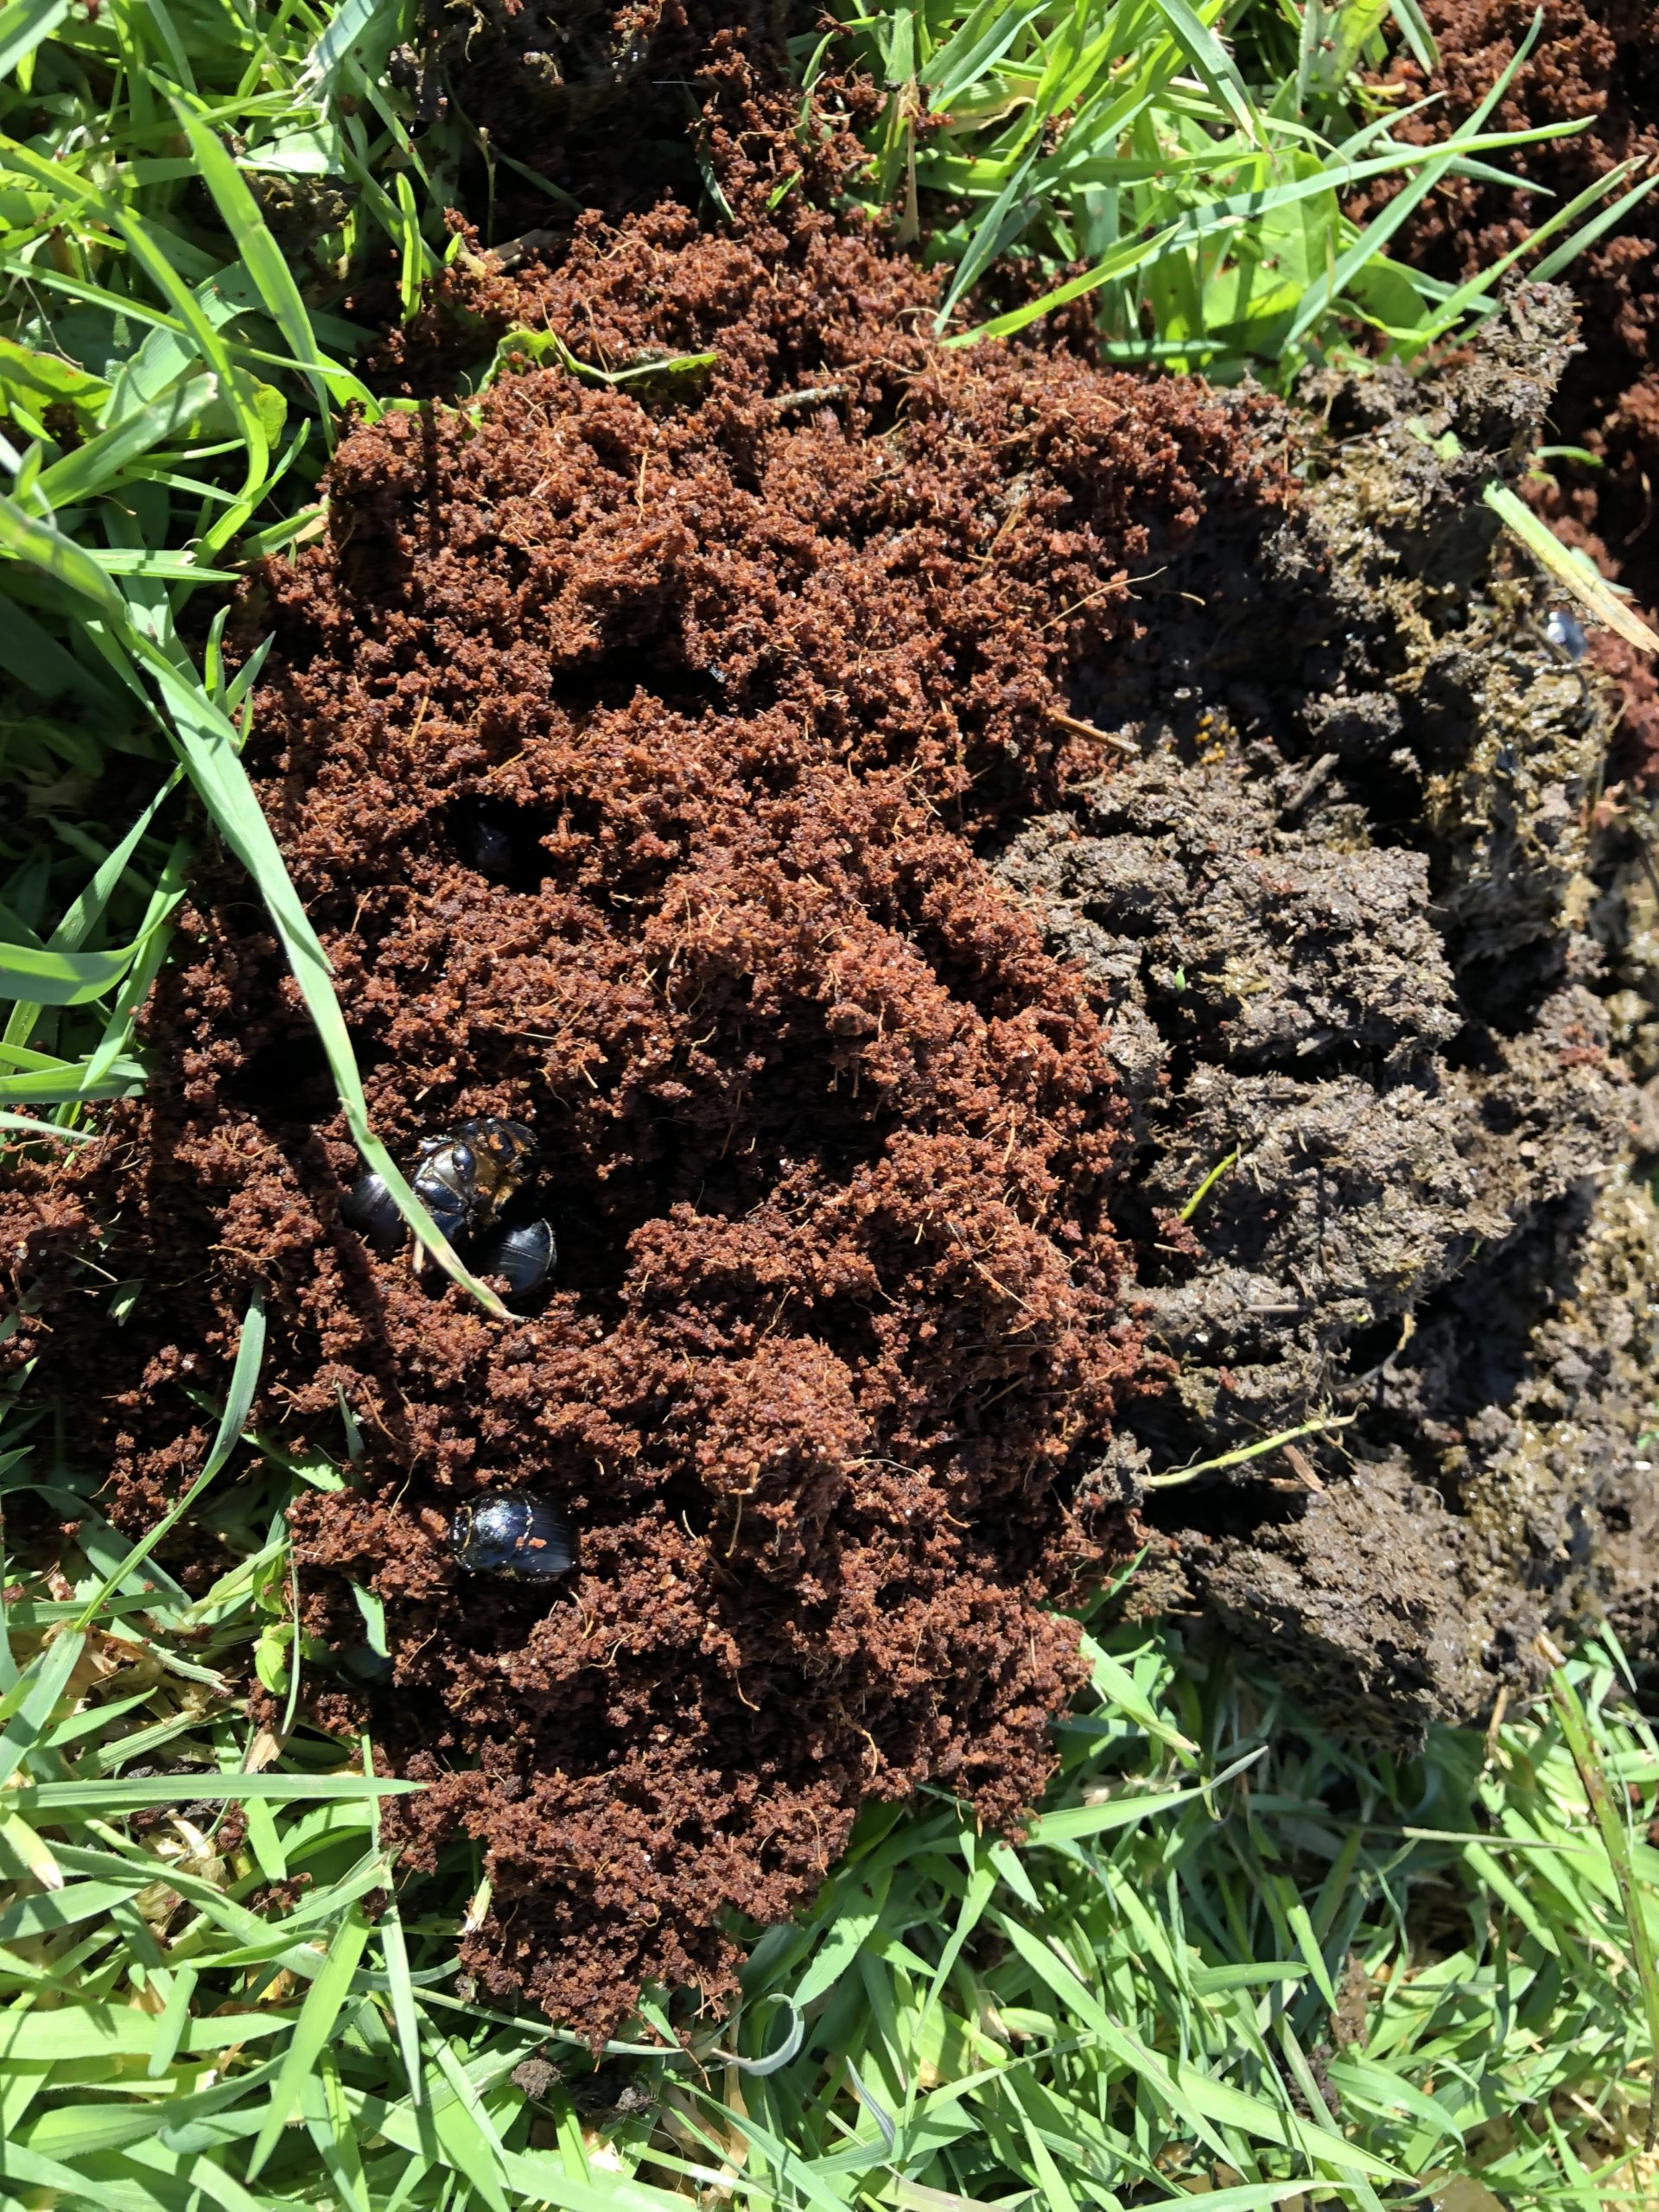 shows dung beetle activity